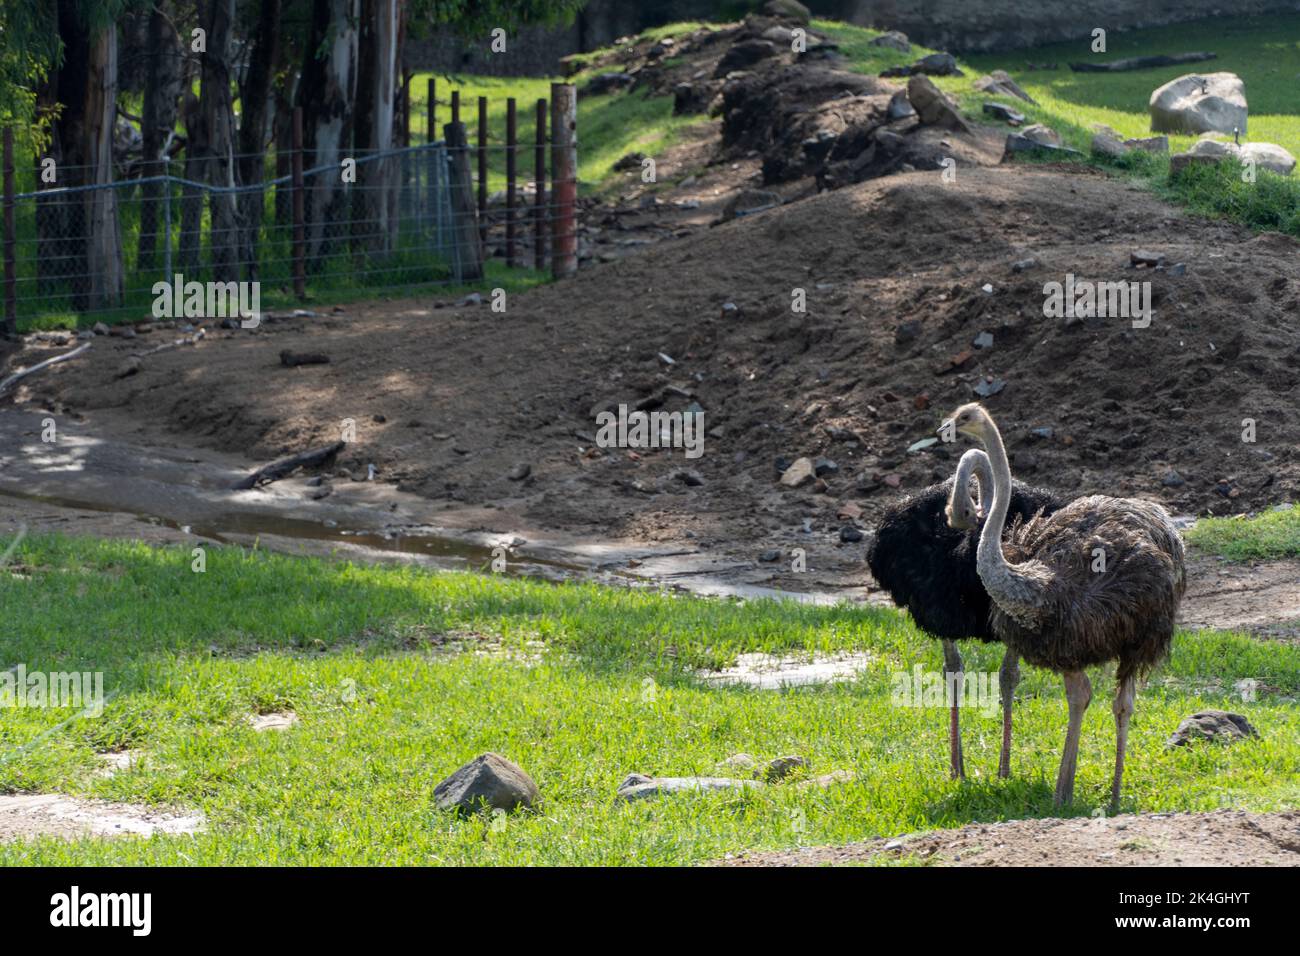 Struthio camelus two ostriches, looking for food on the hill inside the zoo, guadalajara mexico Stock Photo